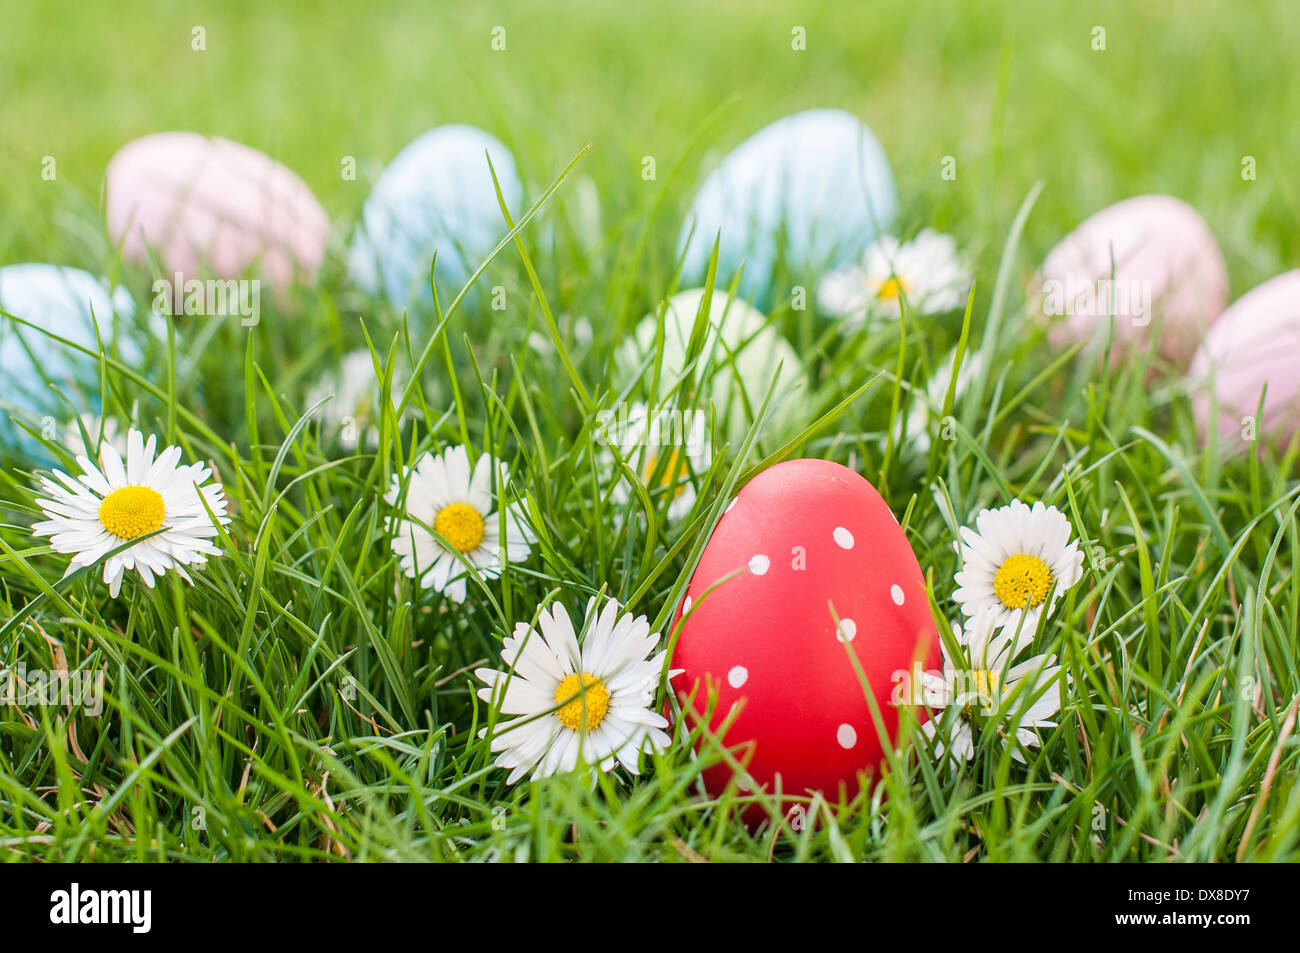 Red Easter egg in a nest of grass and spring flowers Stock Photo